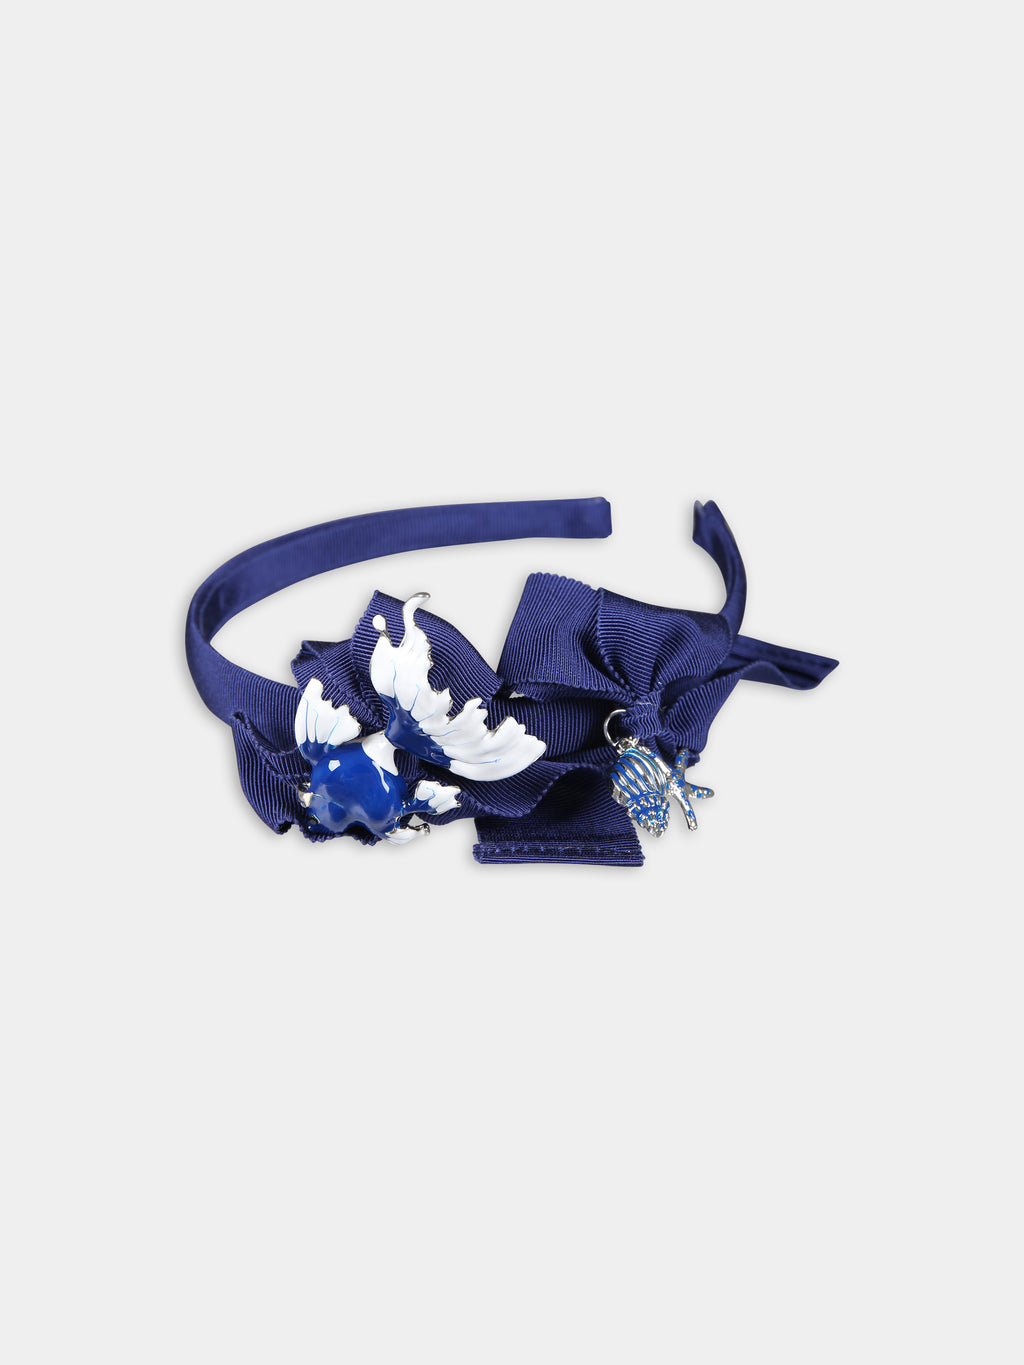 Blue headband for girl with bows